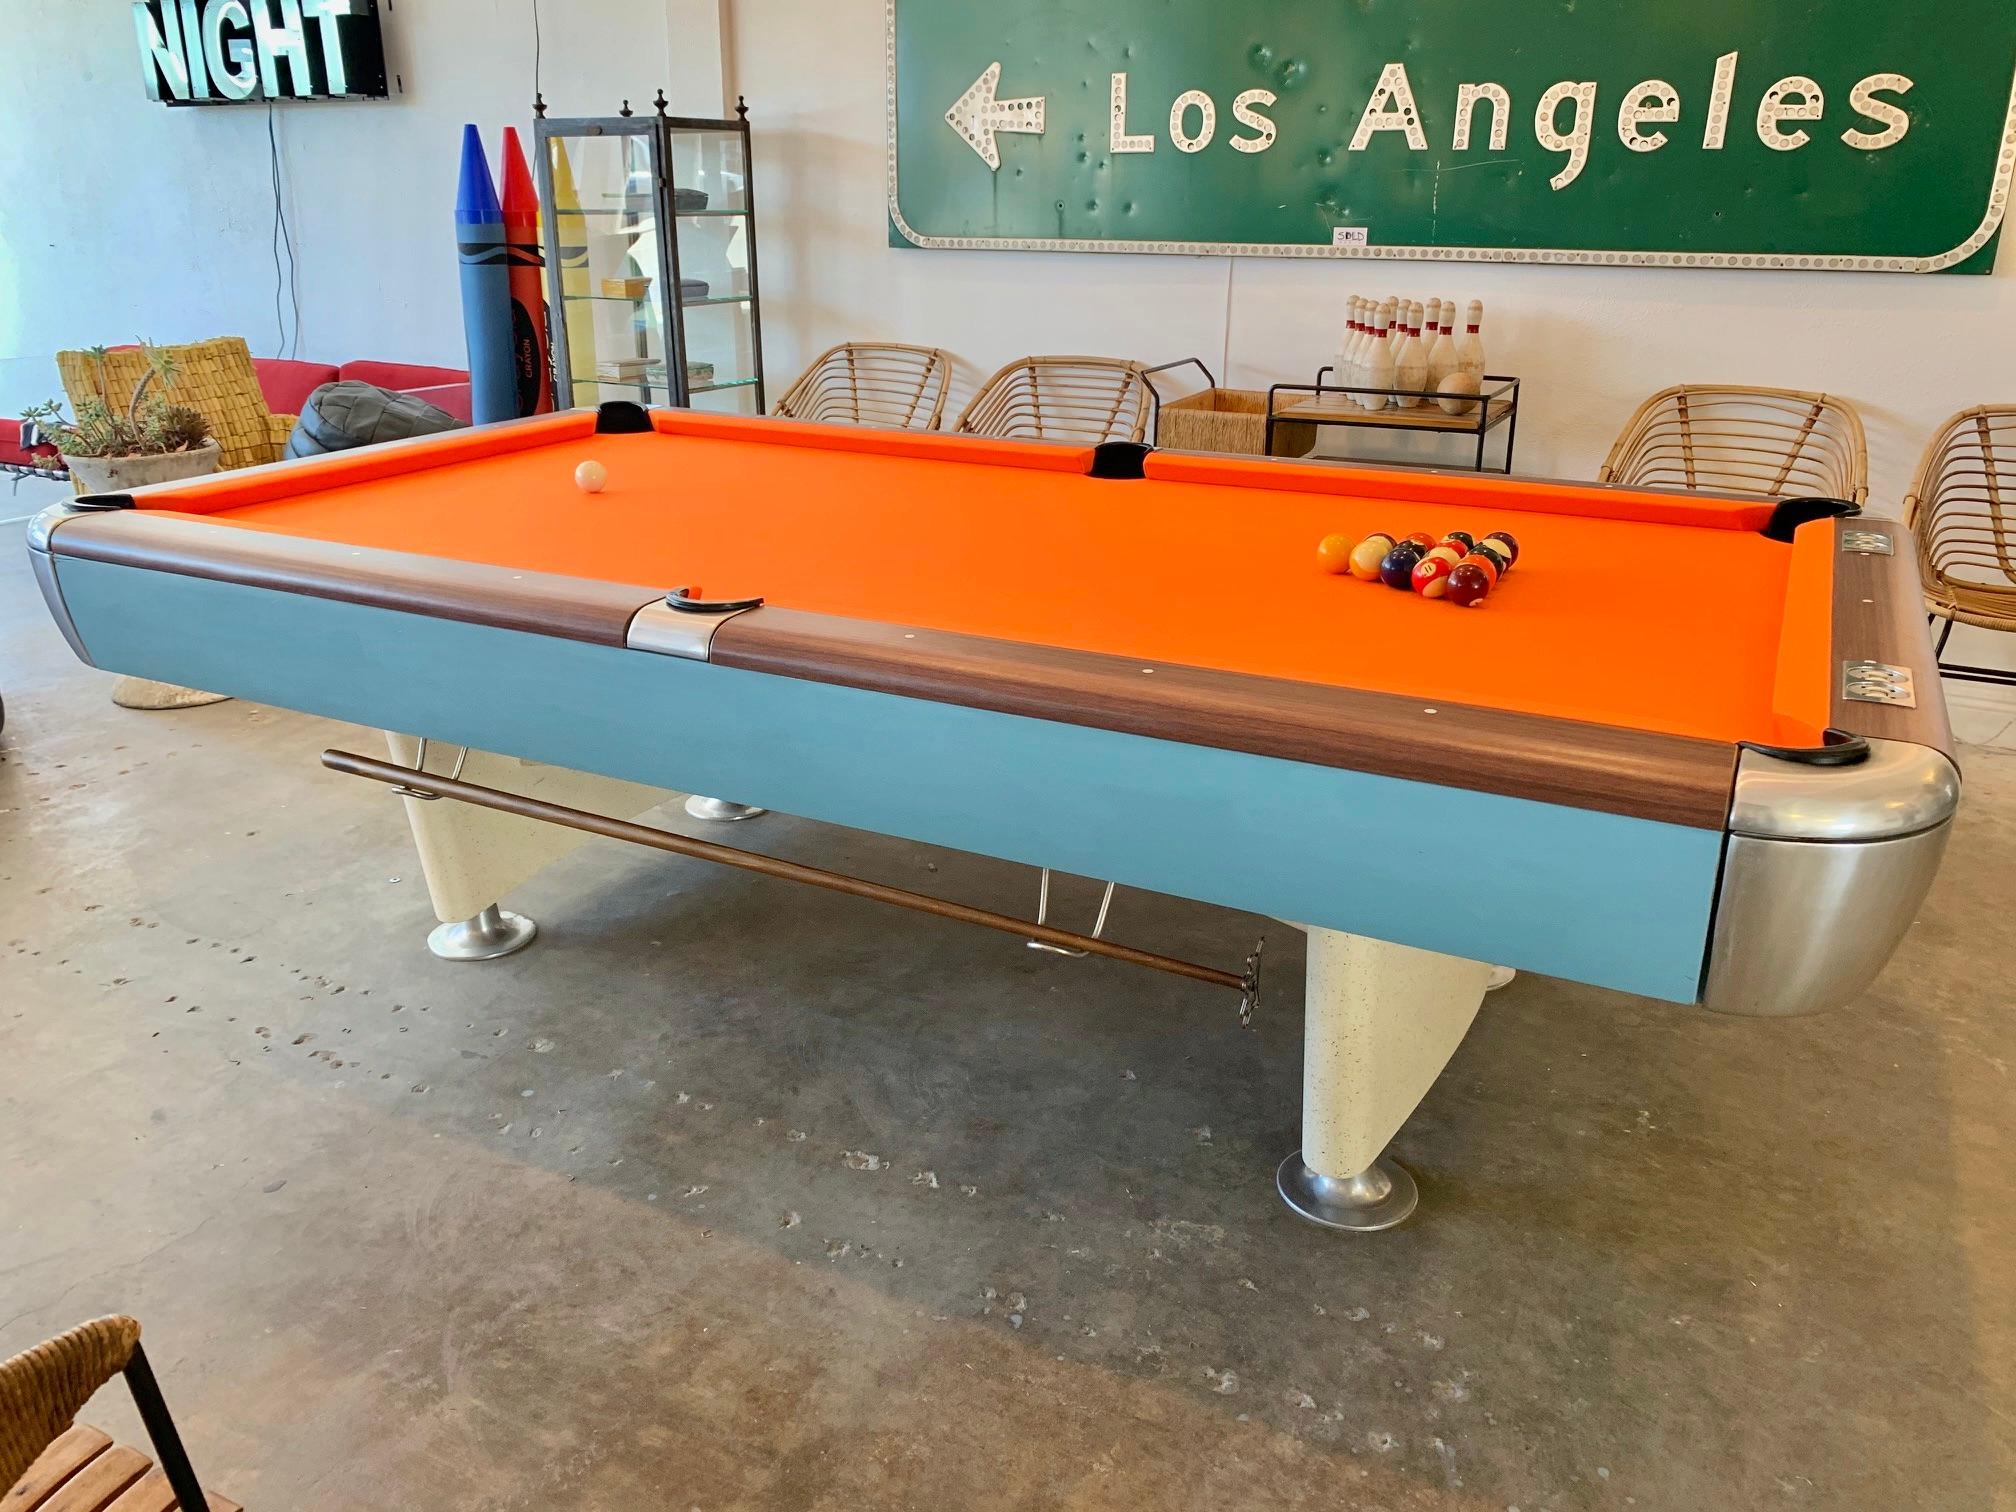 Saunier Wilhem Company vintage pool table from the 1970s. This company went out of business in the 1980s and their pool tables are hard to find. Just restored felt with Championship covering in Signal orange. Baby blue wood side panels with chrome